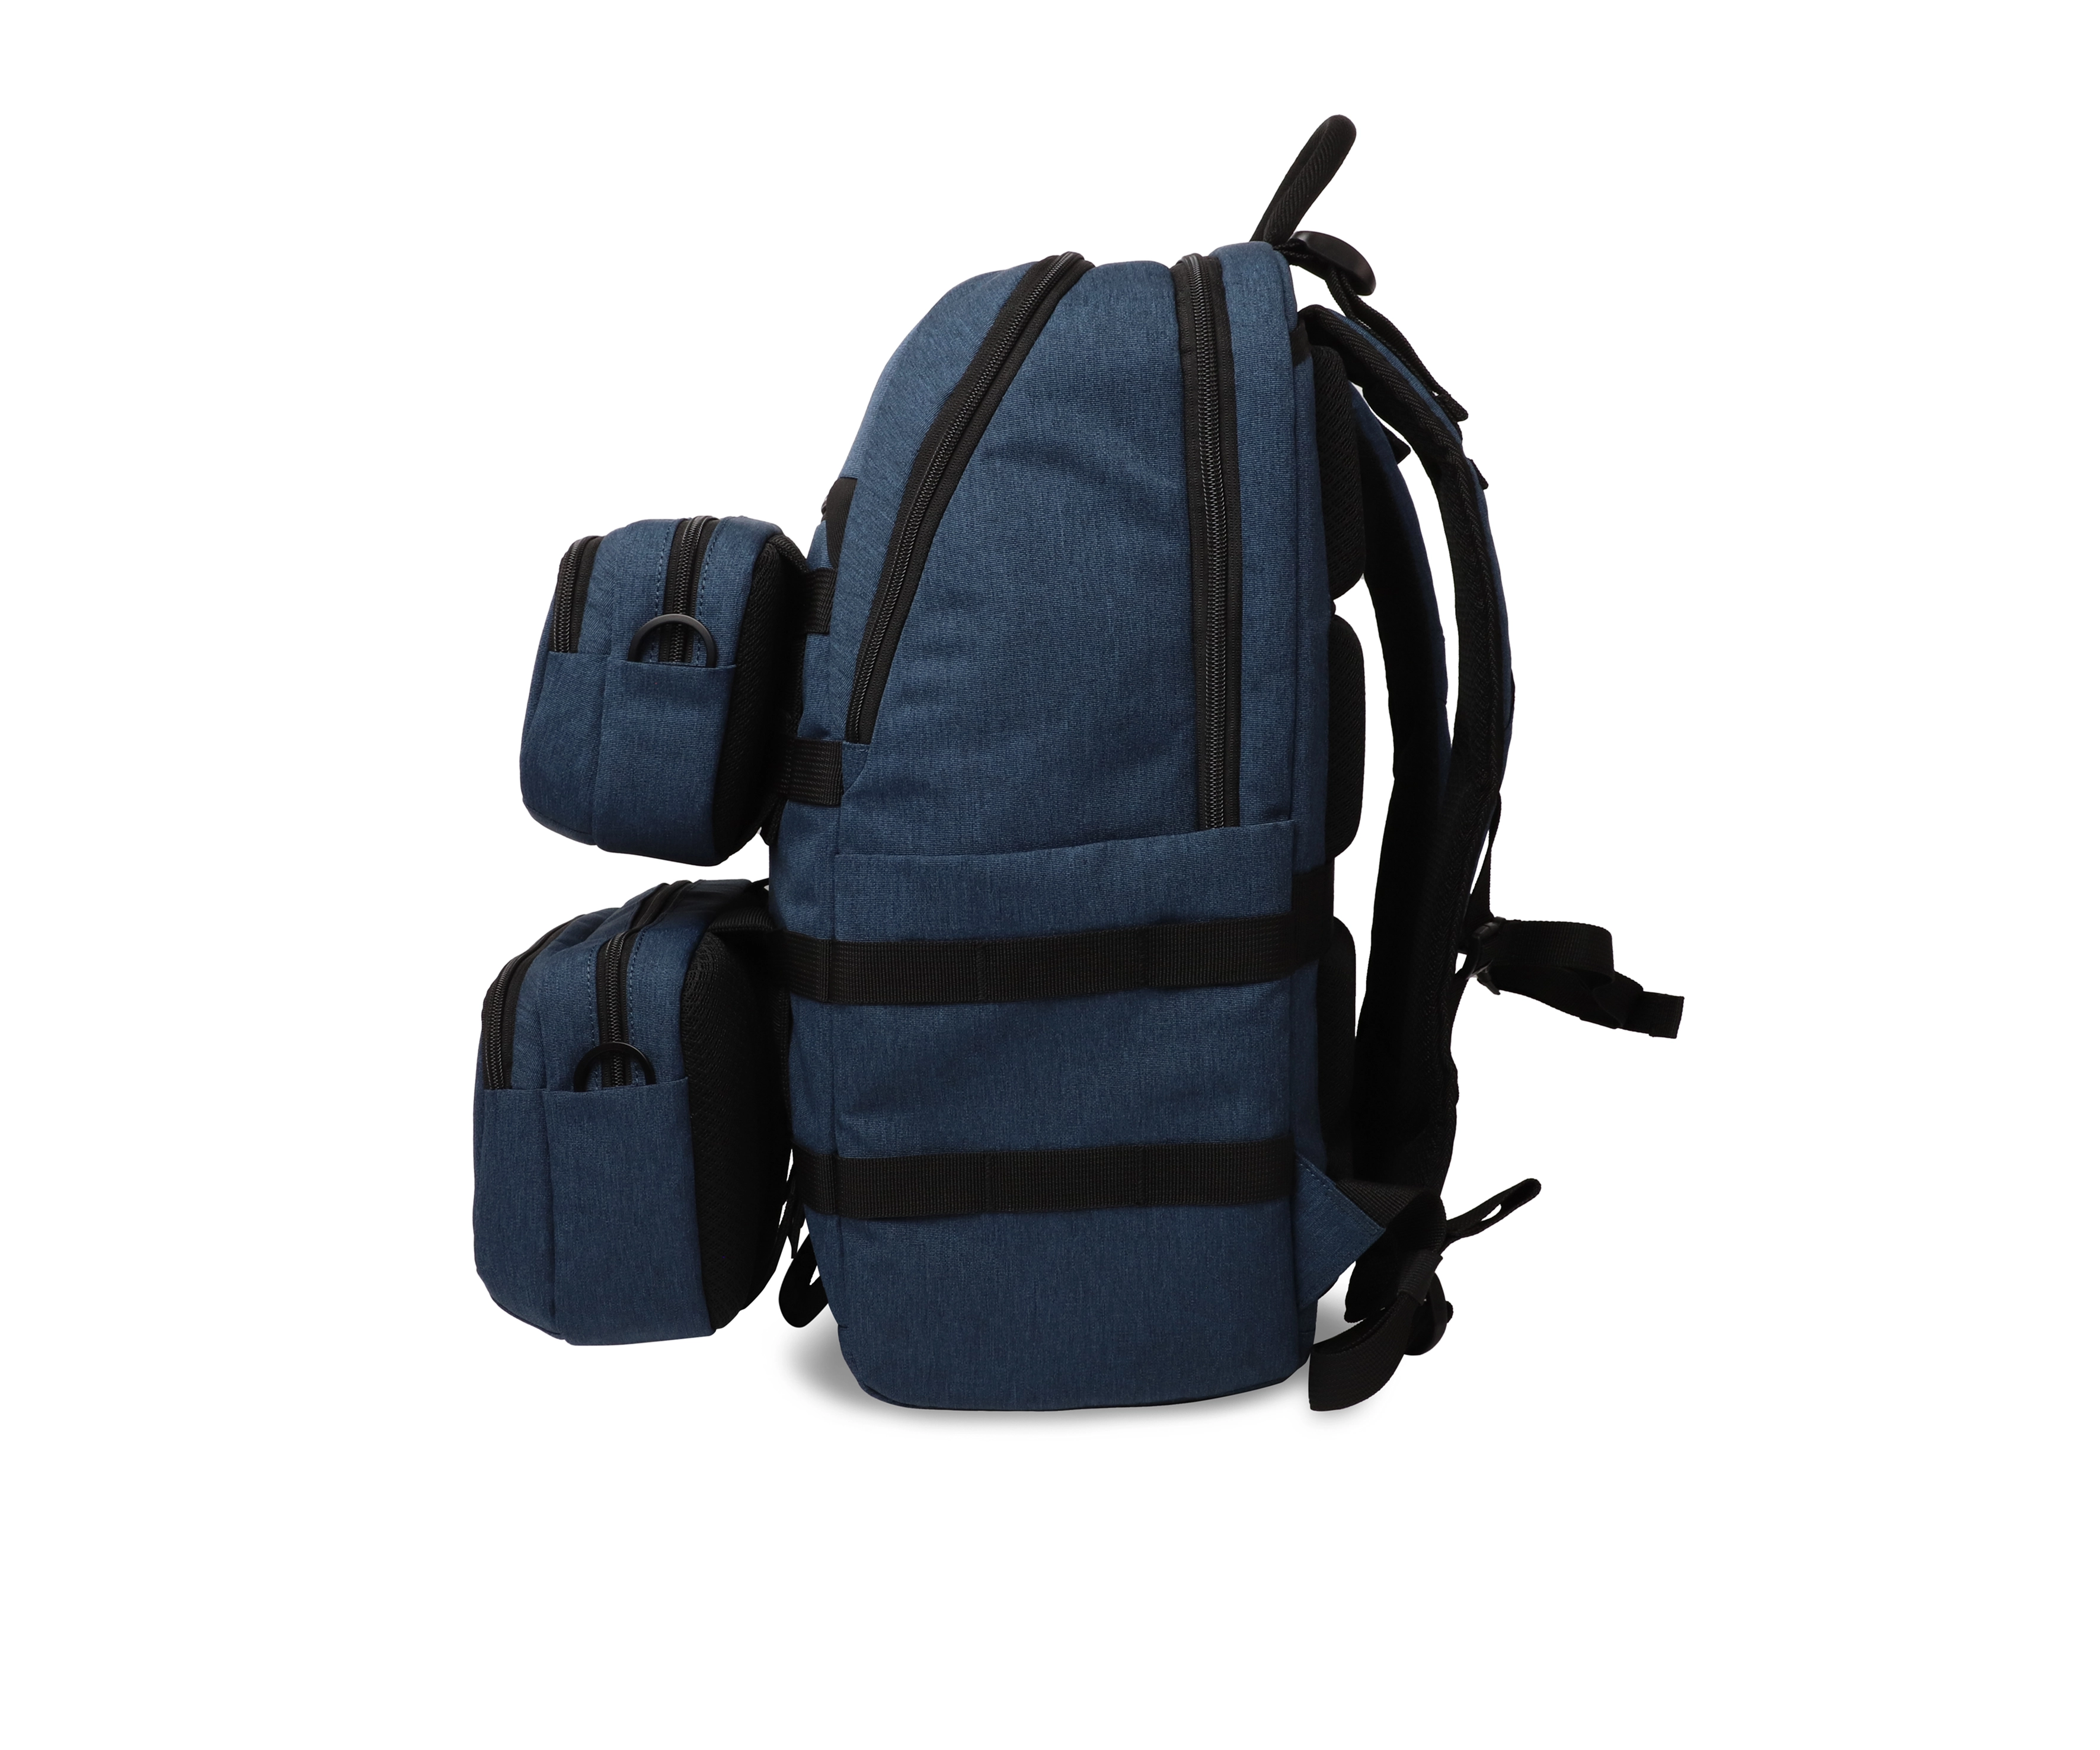 backpacking packs with detachable daypacks